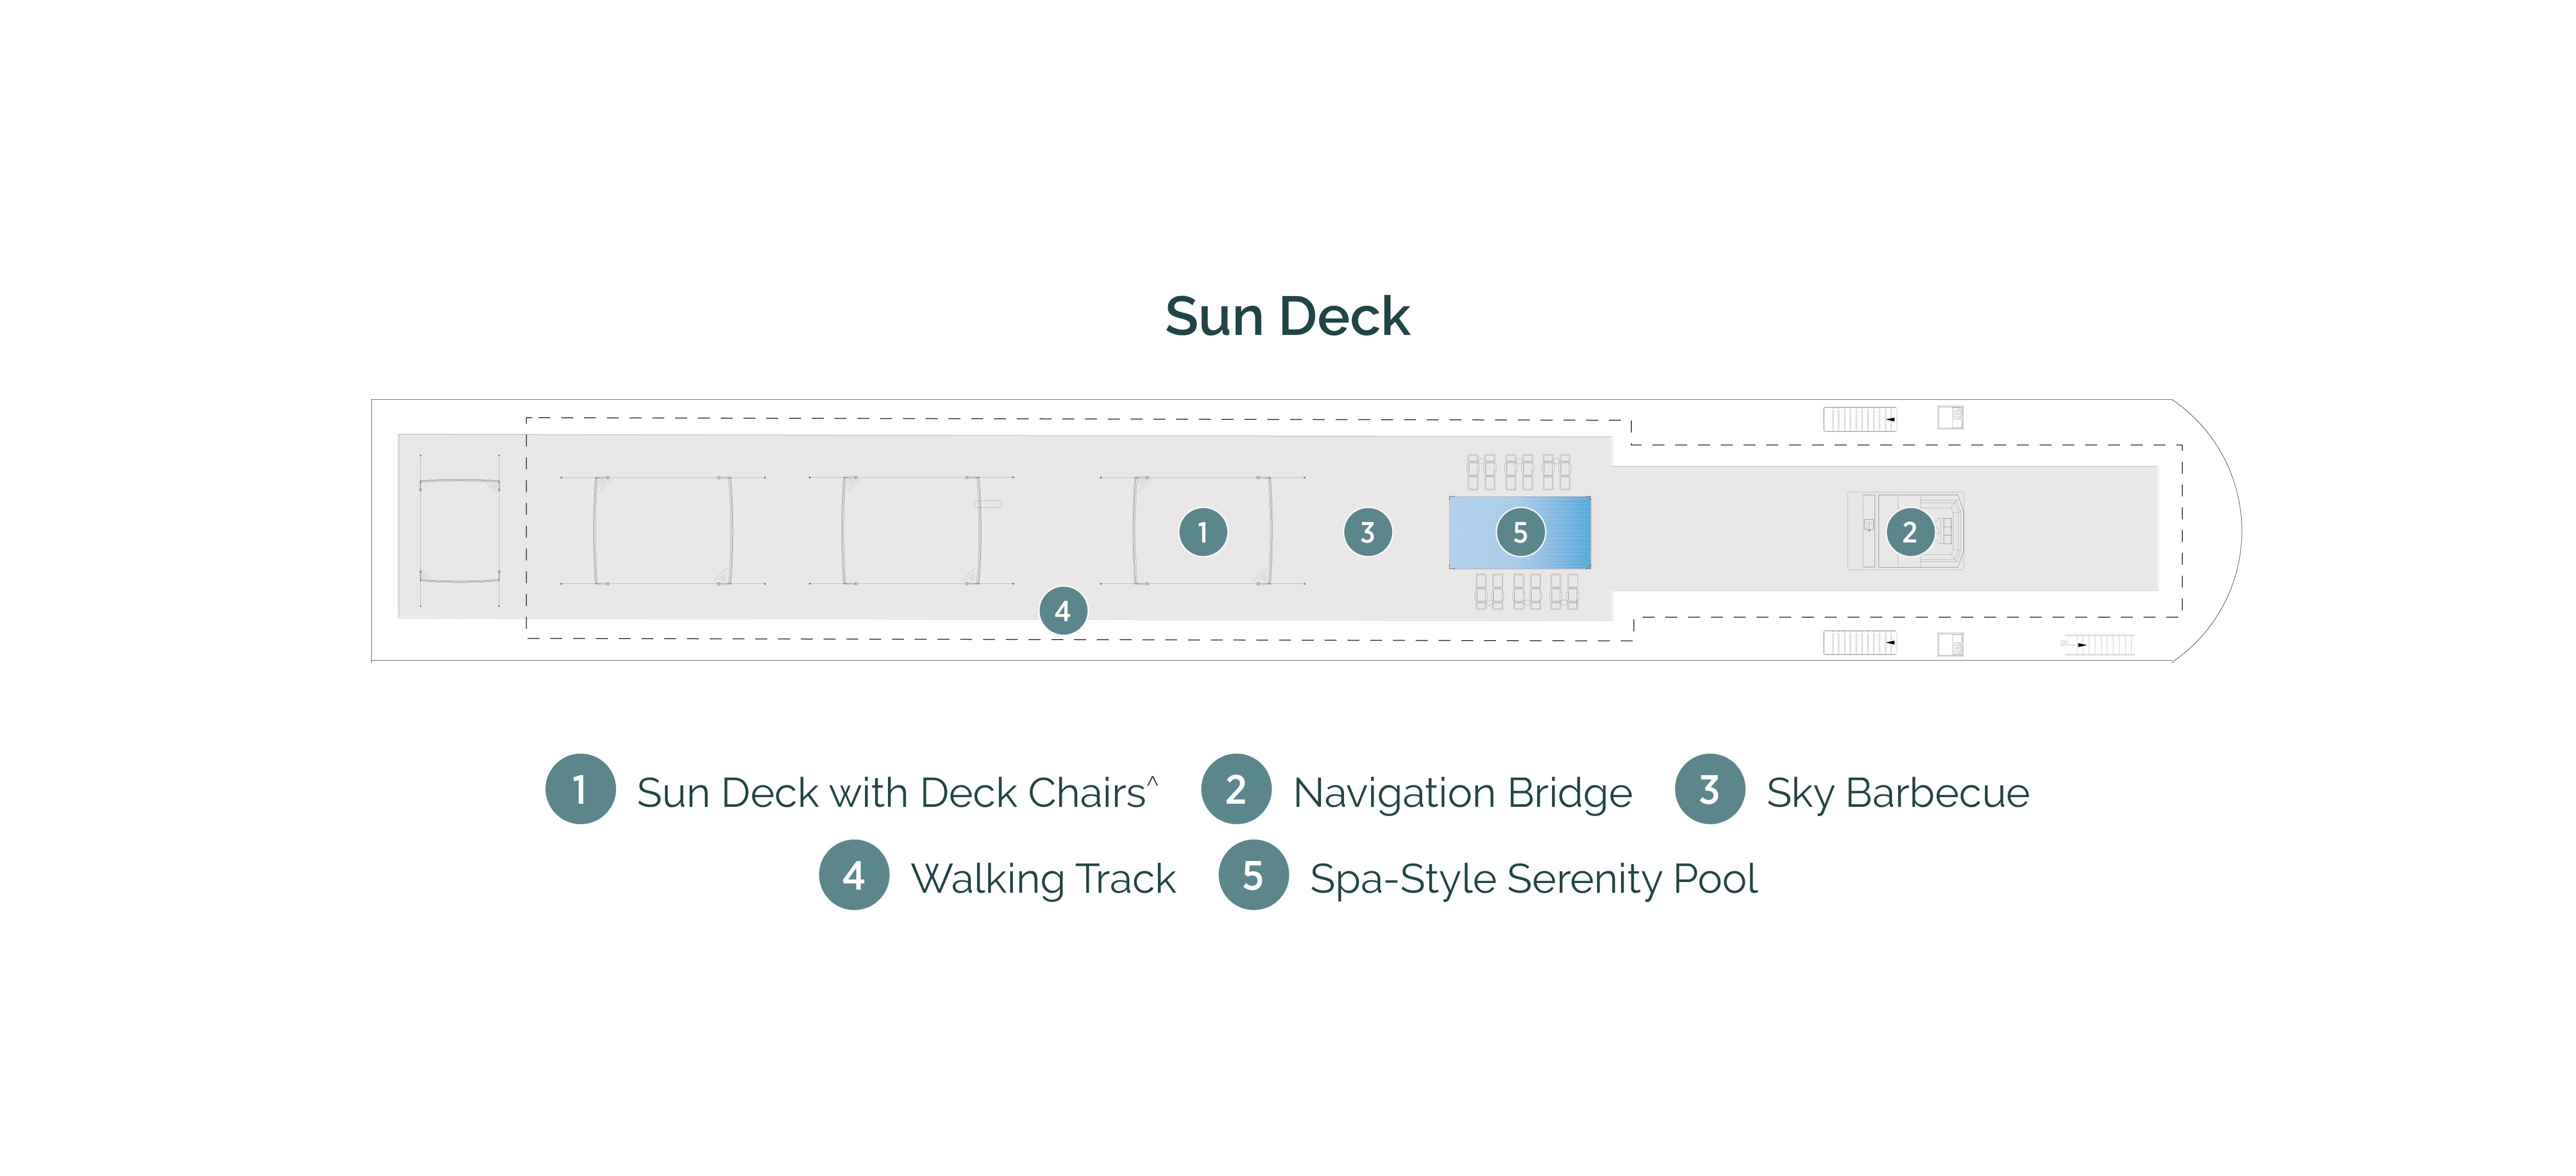 Diagram of ship layout for the Sun Deck of Emerald Cruises’ Douro river cruising Star-Ship, Emerald Radiance